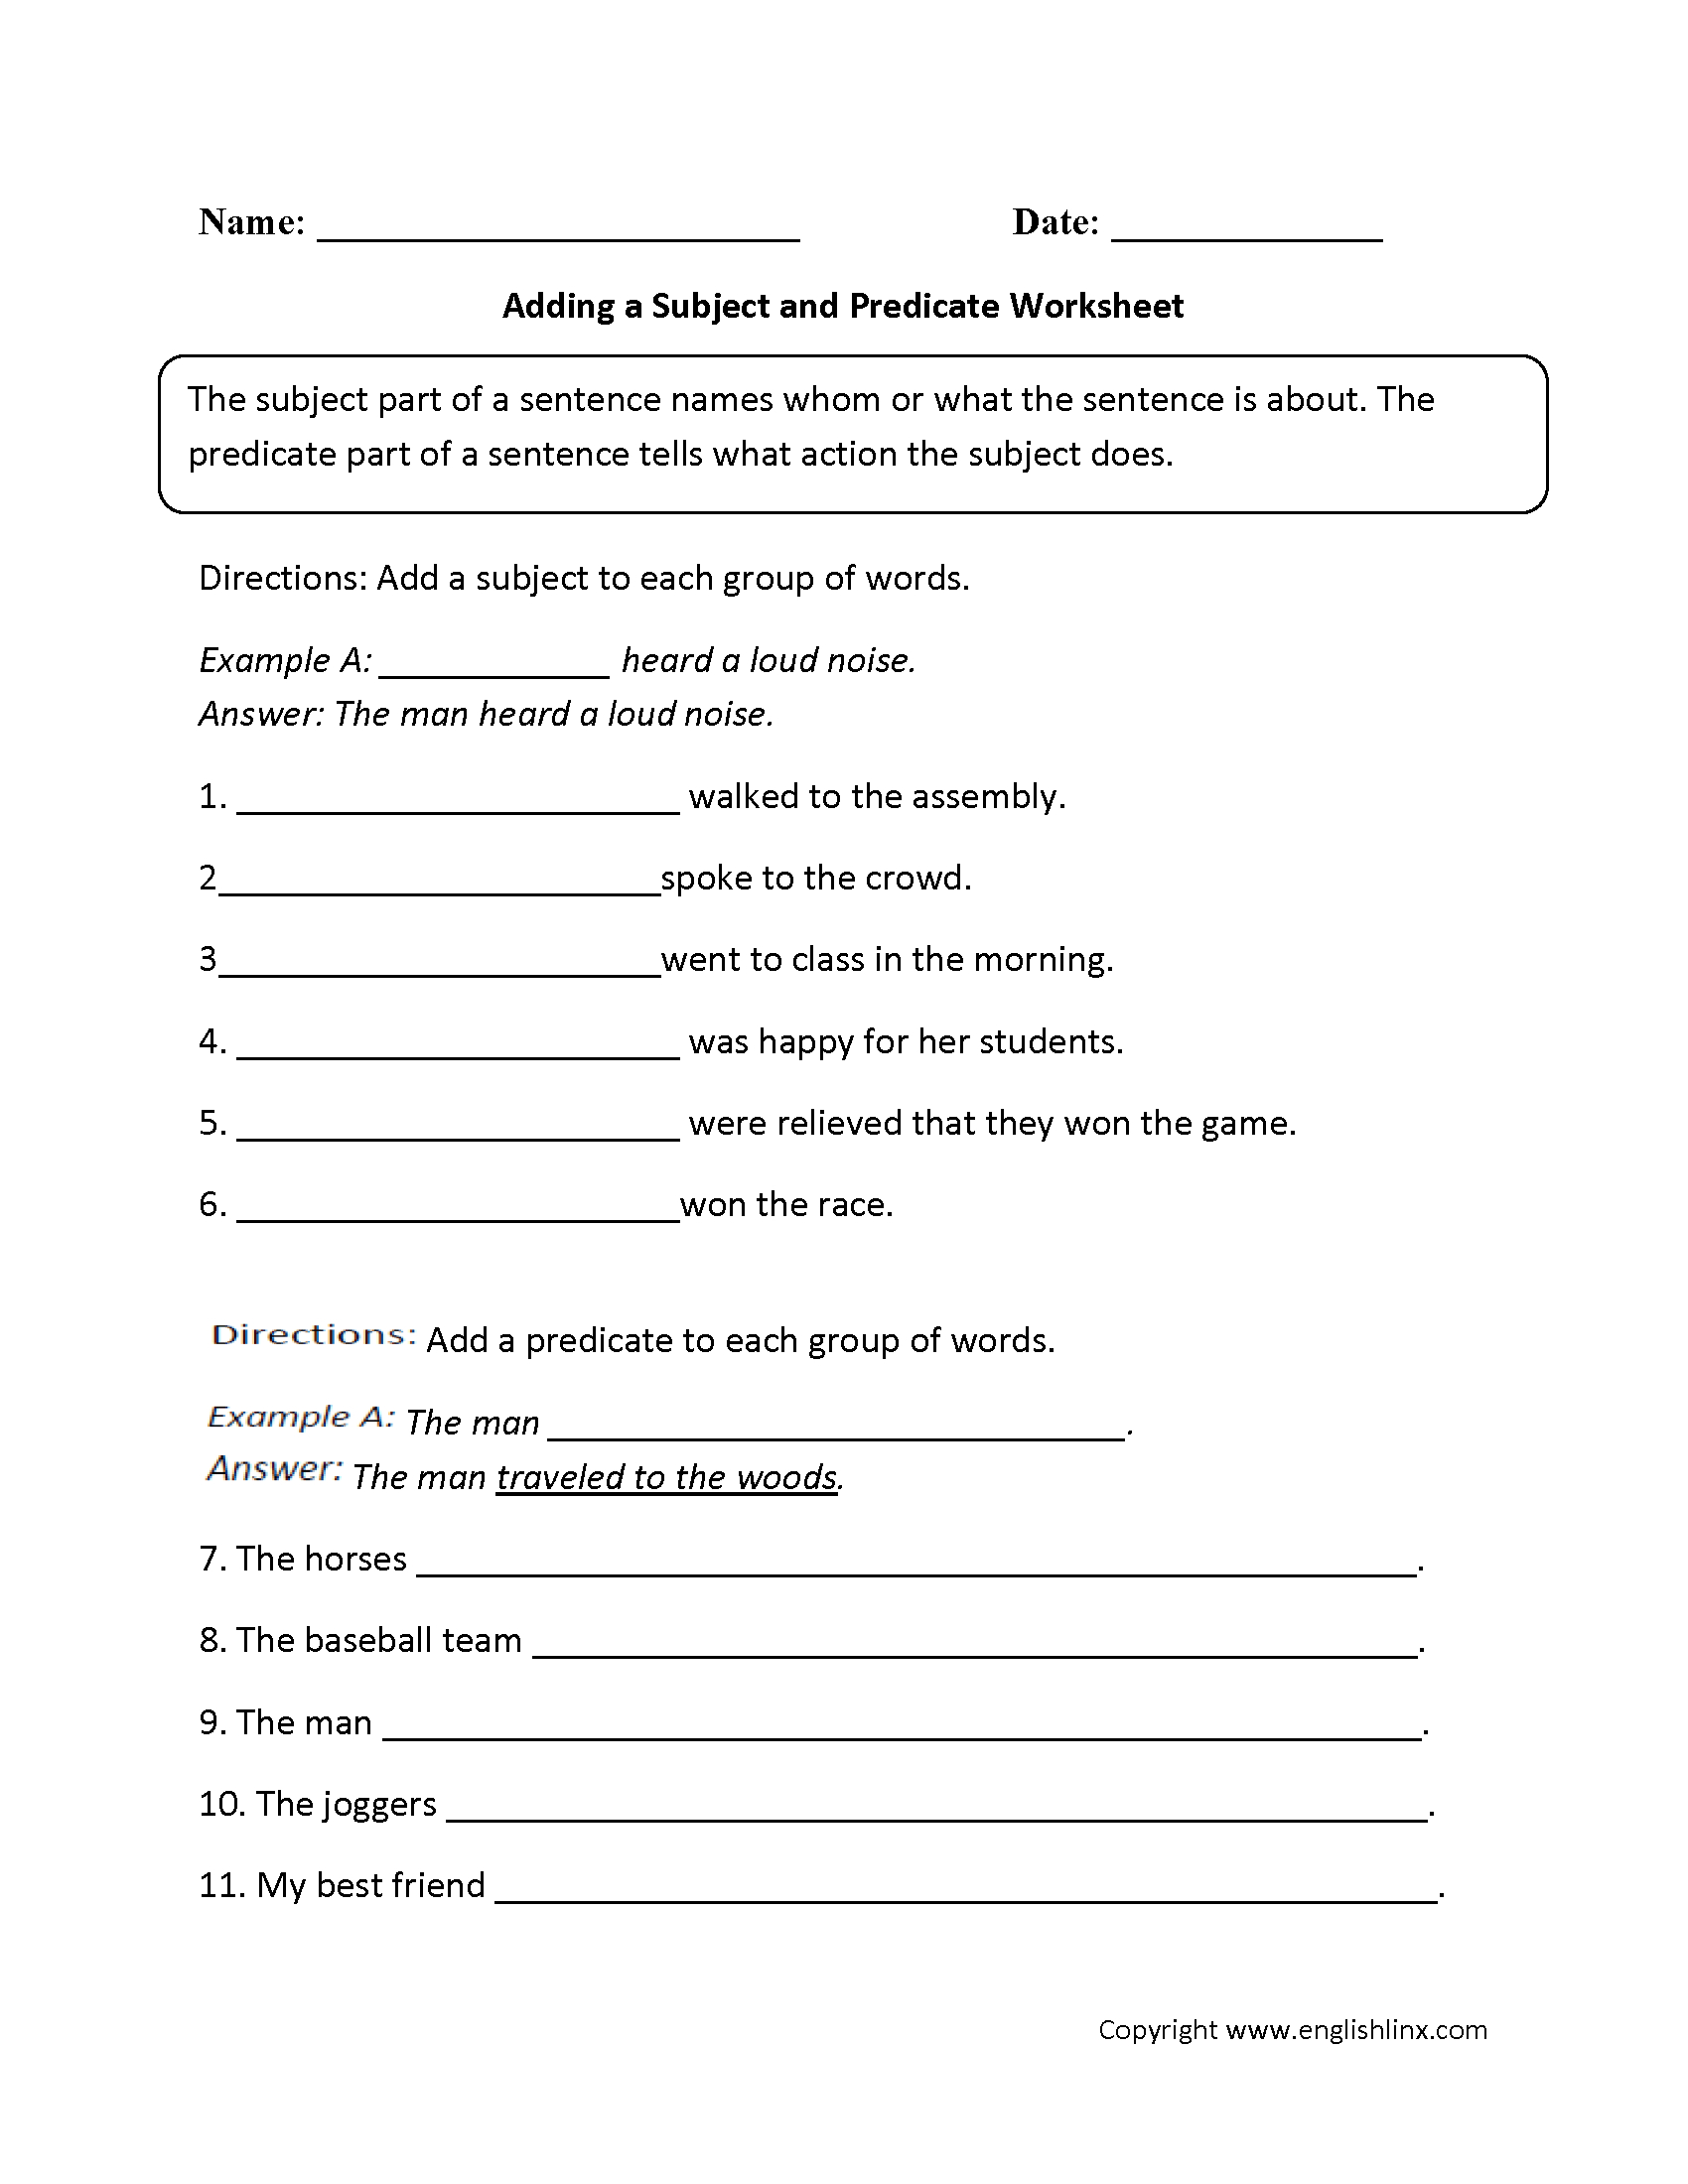 Adding A Subject And Predicate Worksheet | Rti Ela Middle School | Free Printable Subject Predicate Worksheets 2Nd Grade